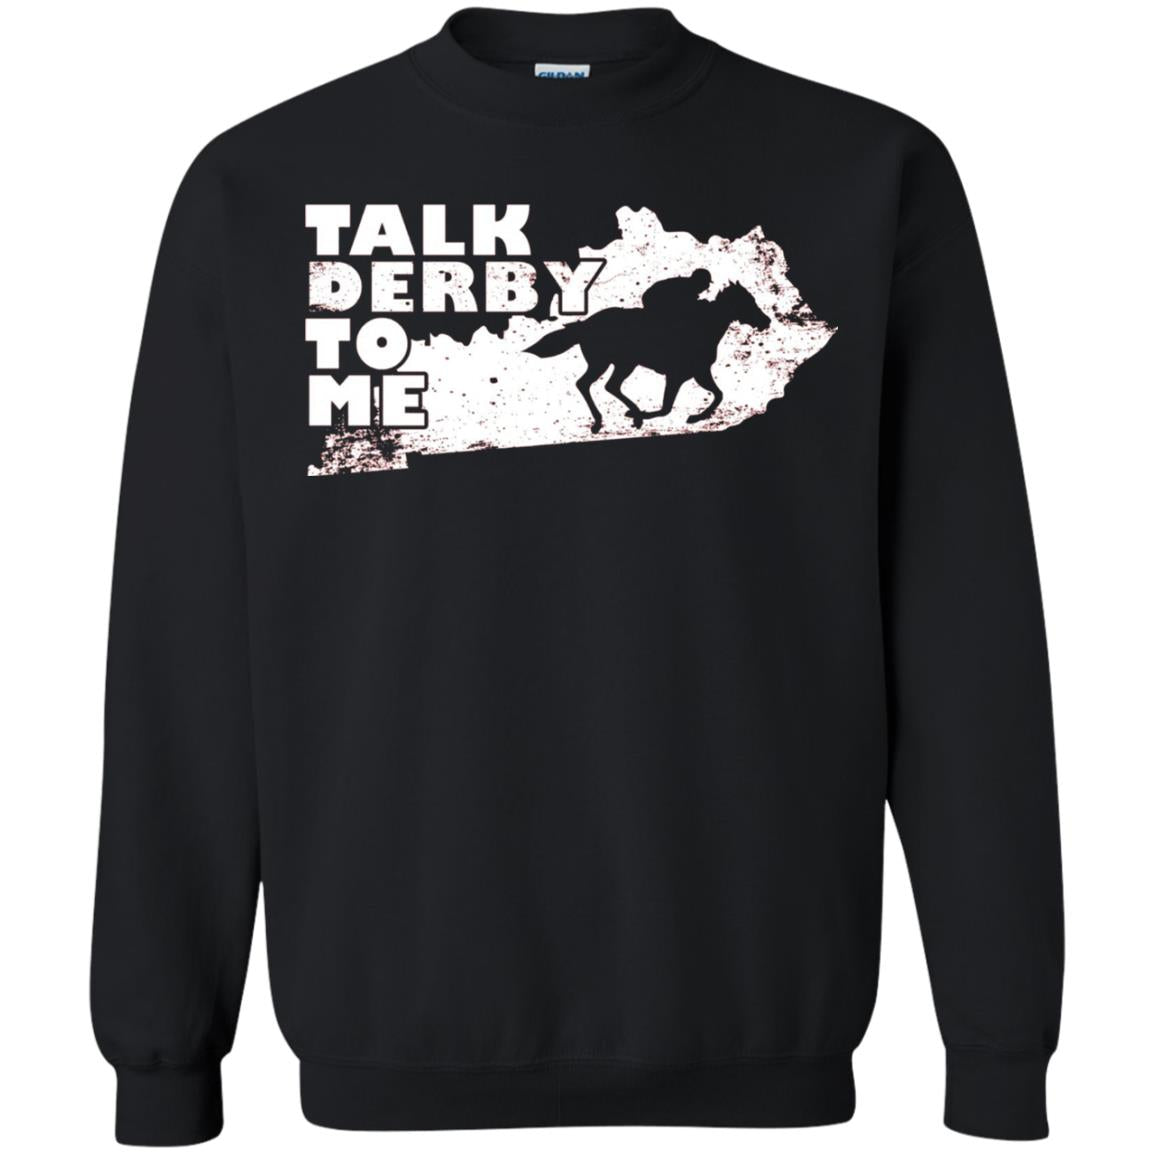 Talk Derby To Me Horse Race Shirt